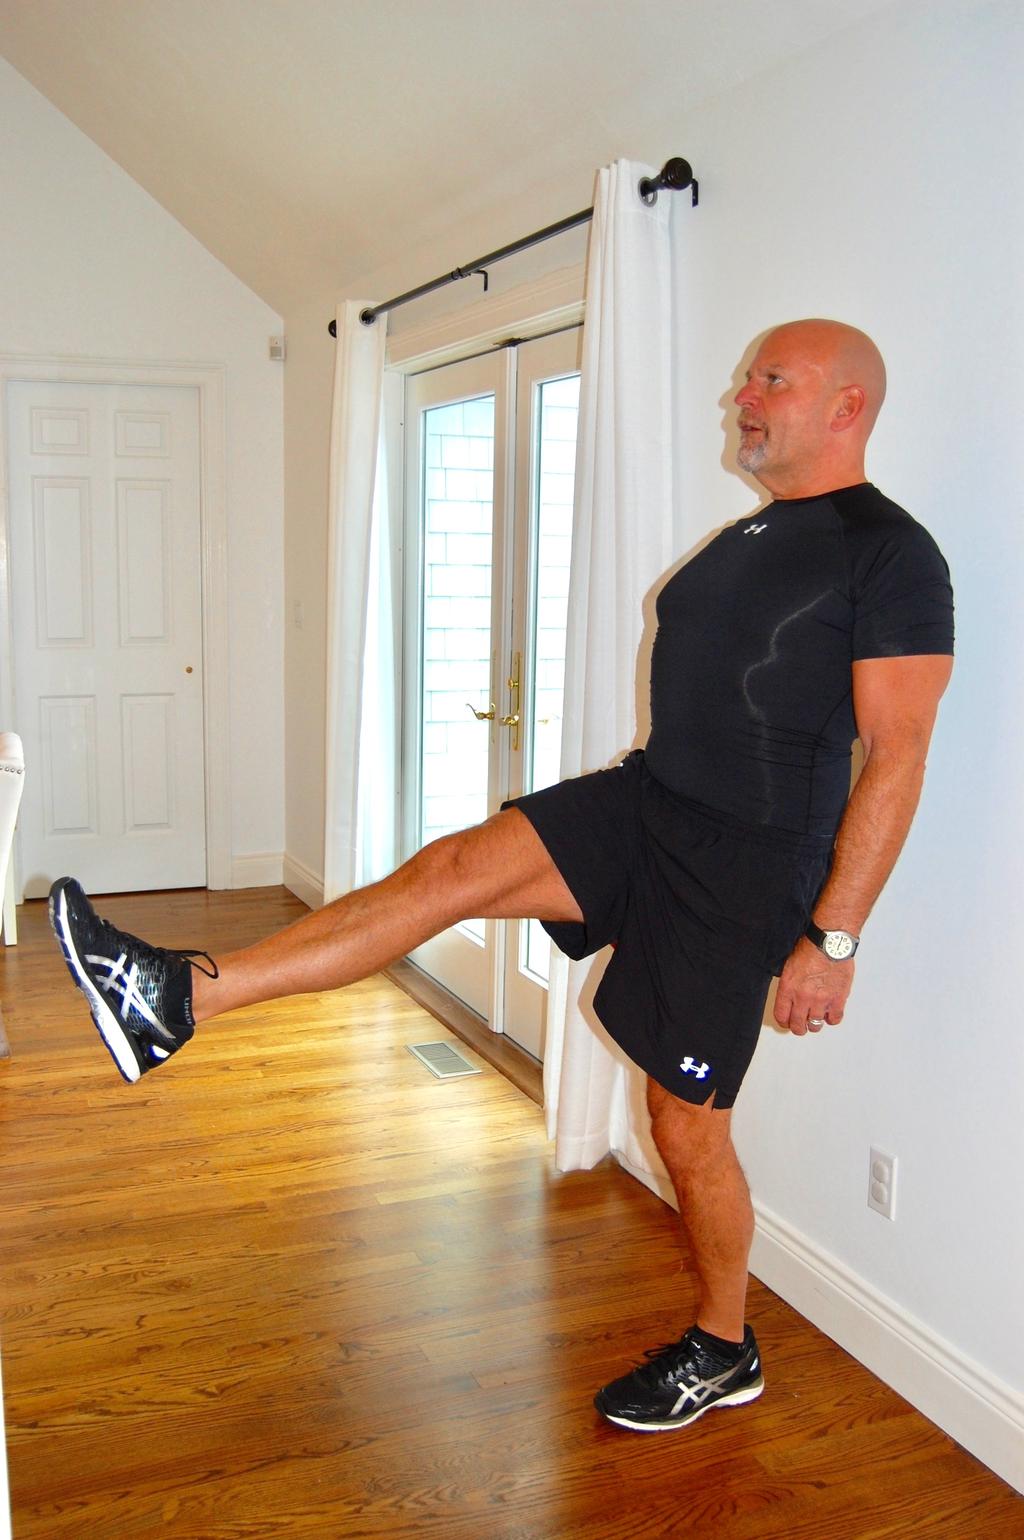 Standing Straight Leg Lift This exercise strengthens the muscles in your front hip to stabilize your